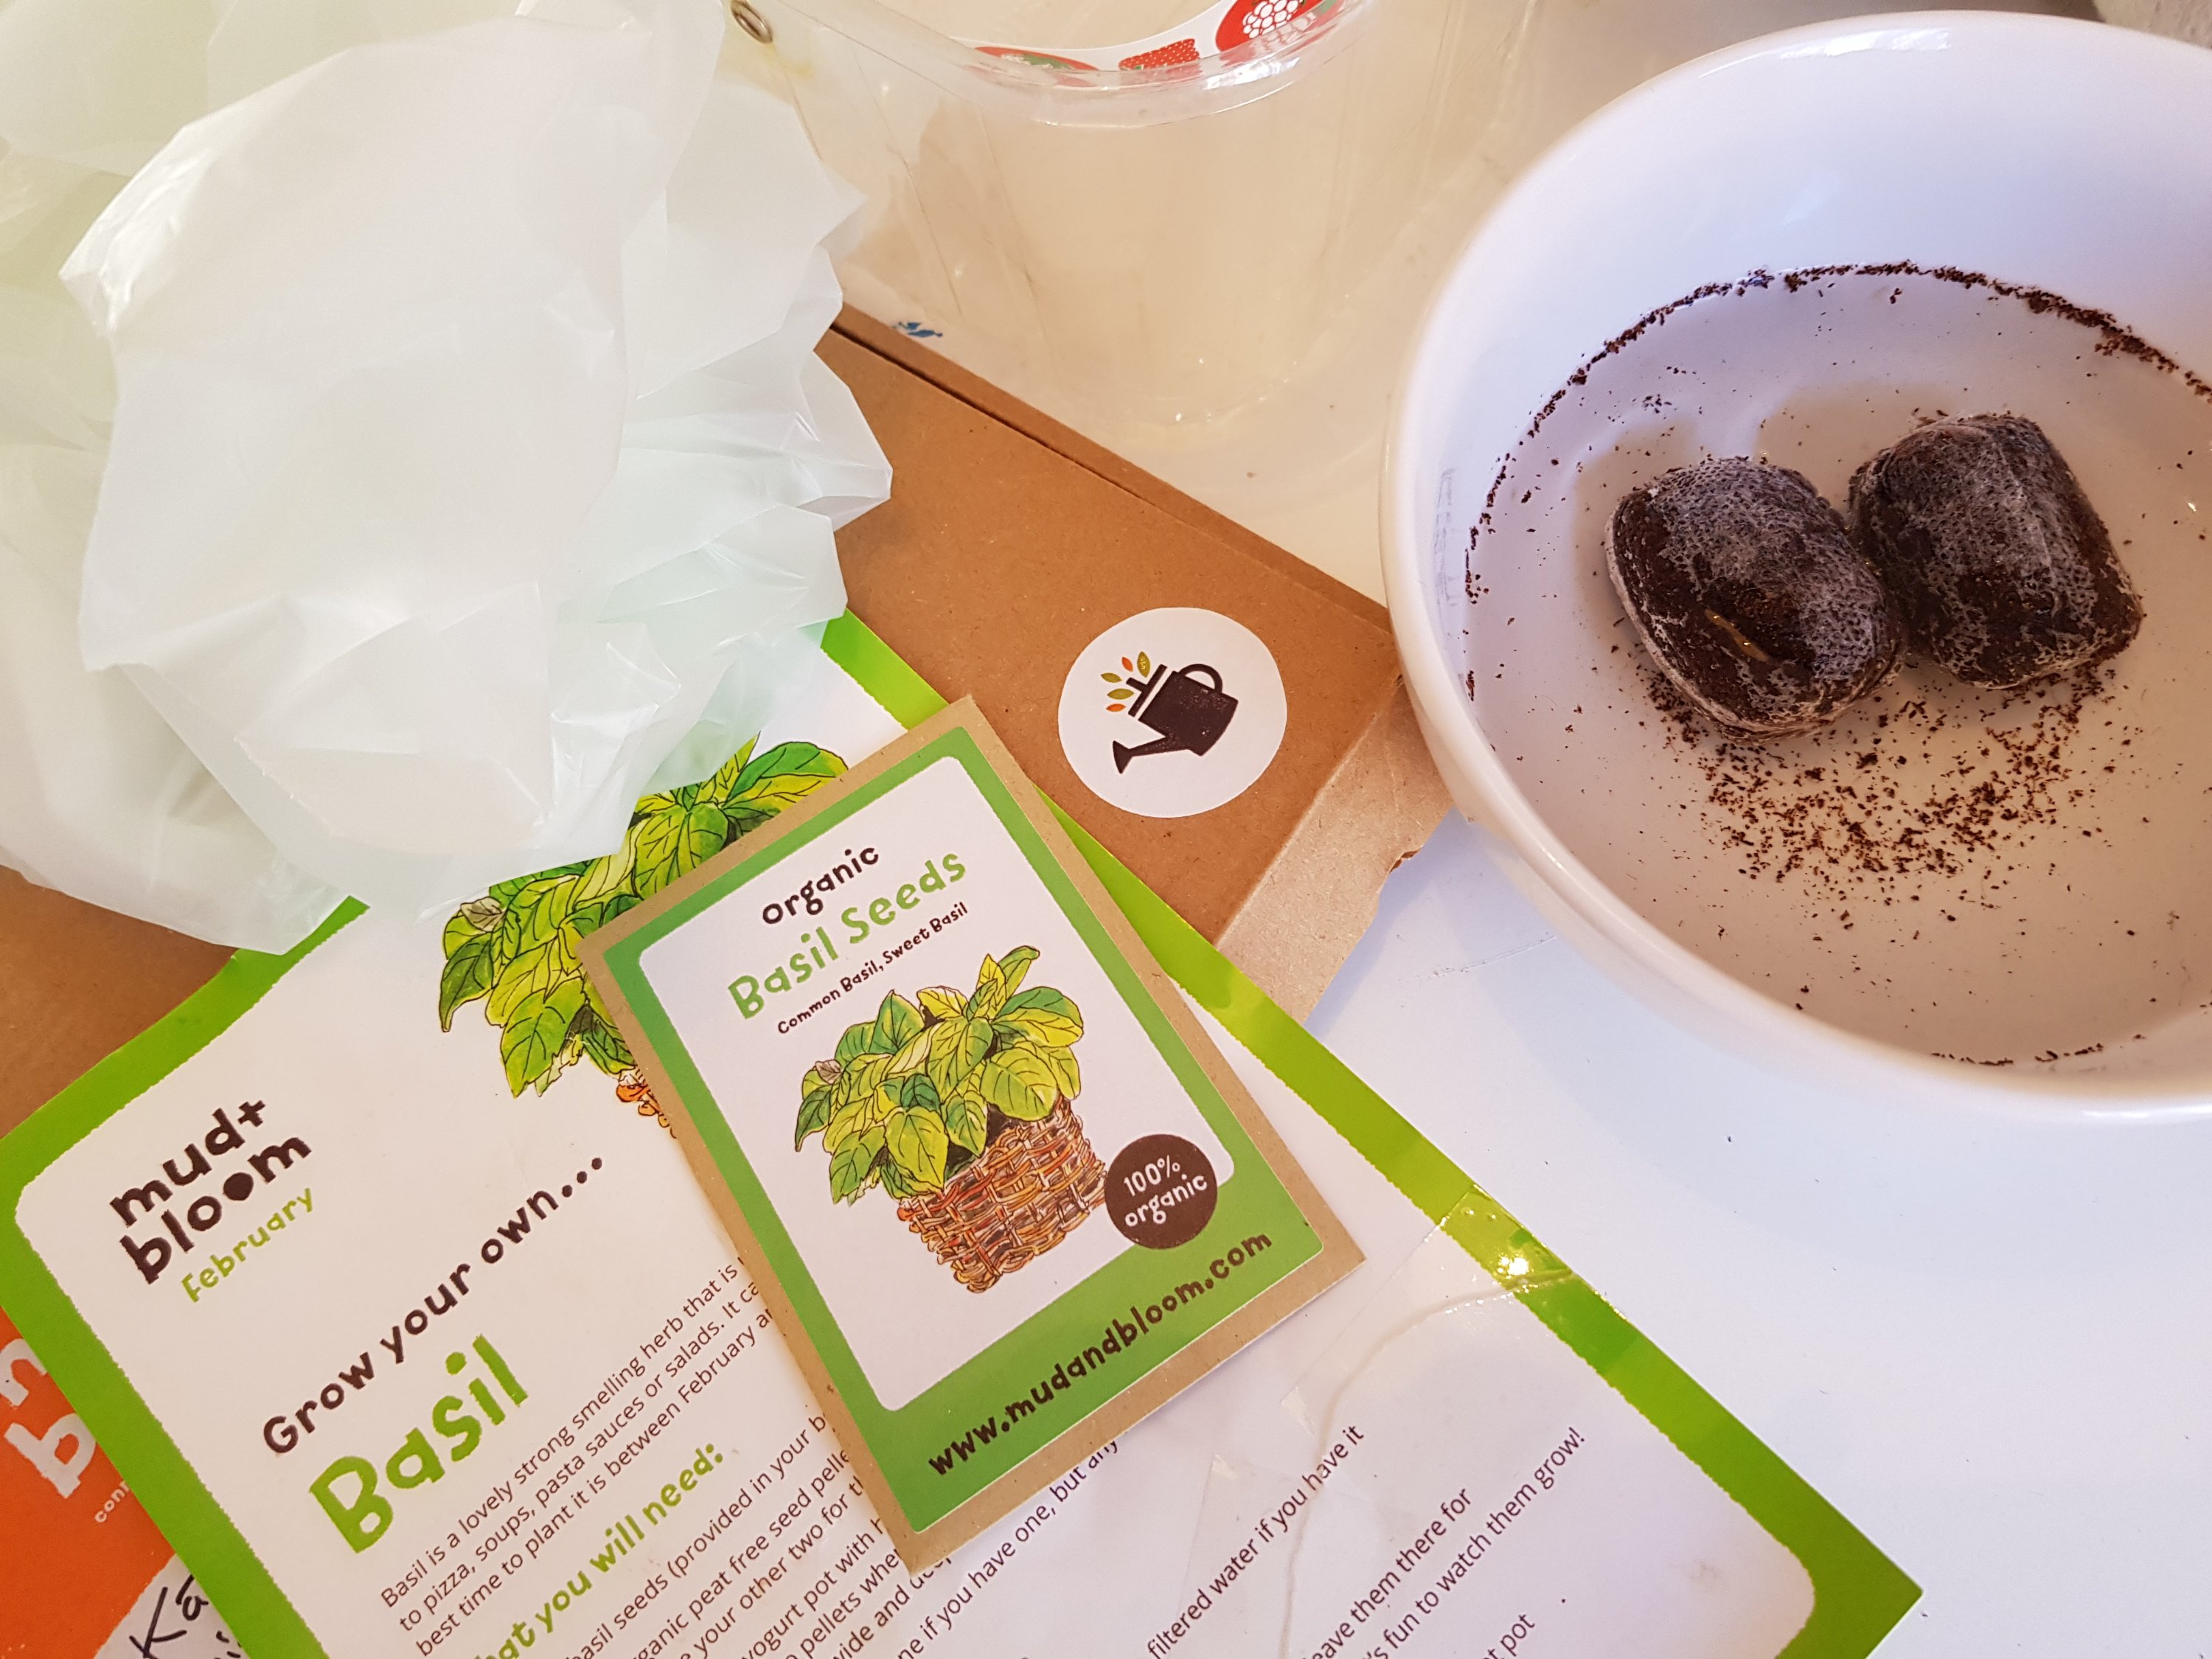 An image of everything needed for grow your own basil. Soil pellets expanding in water.